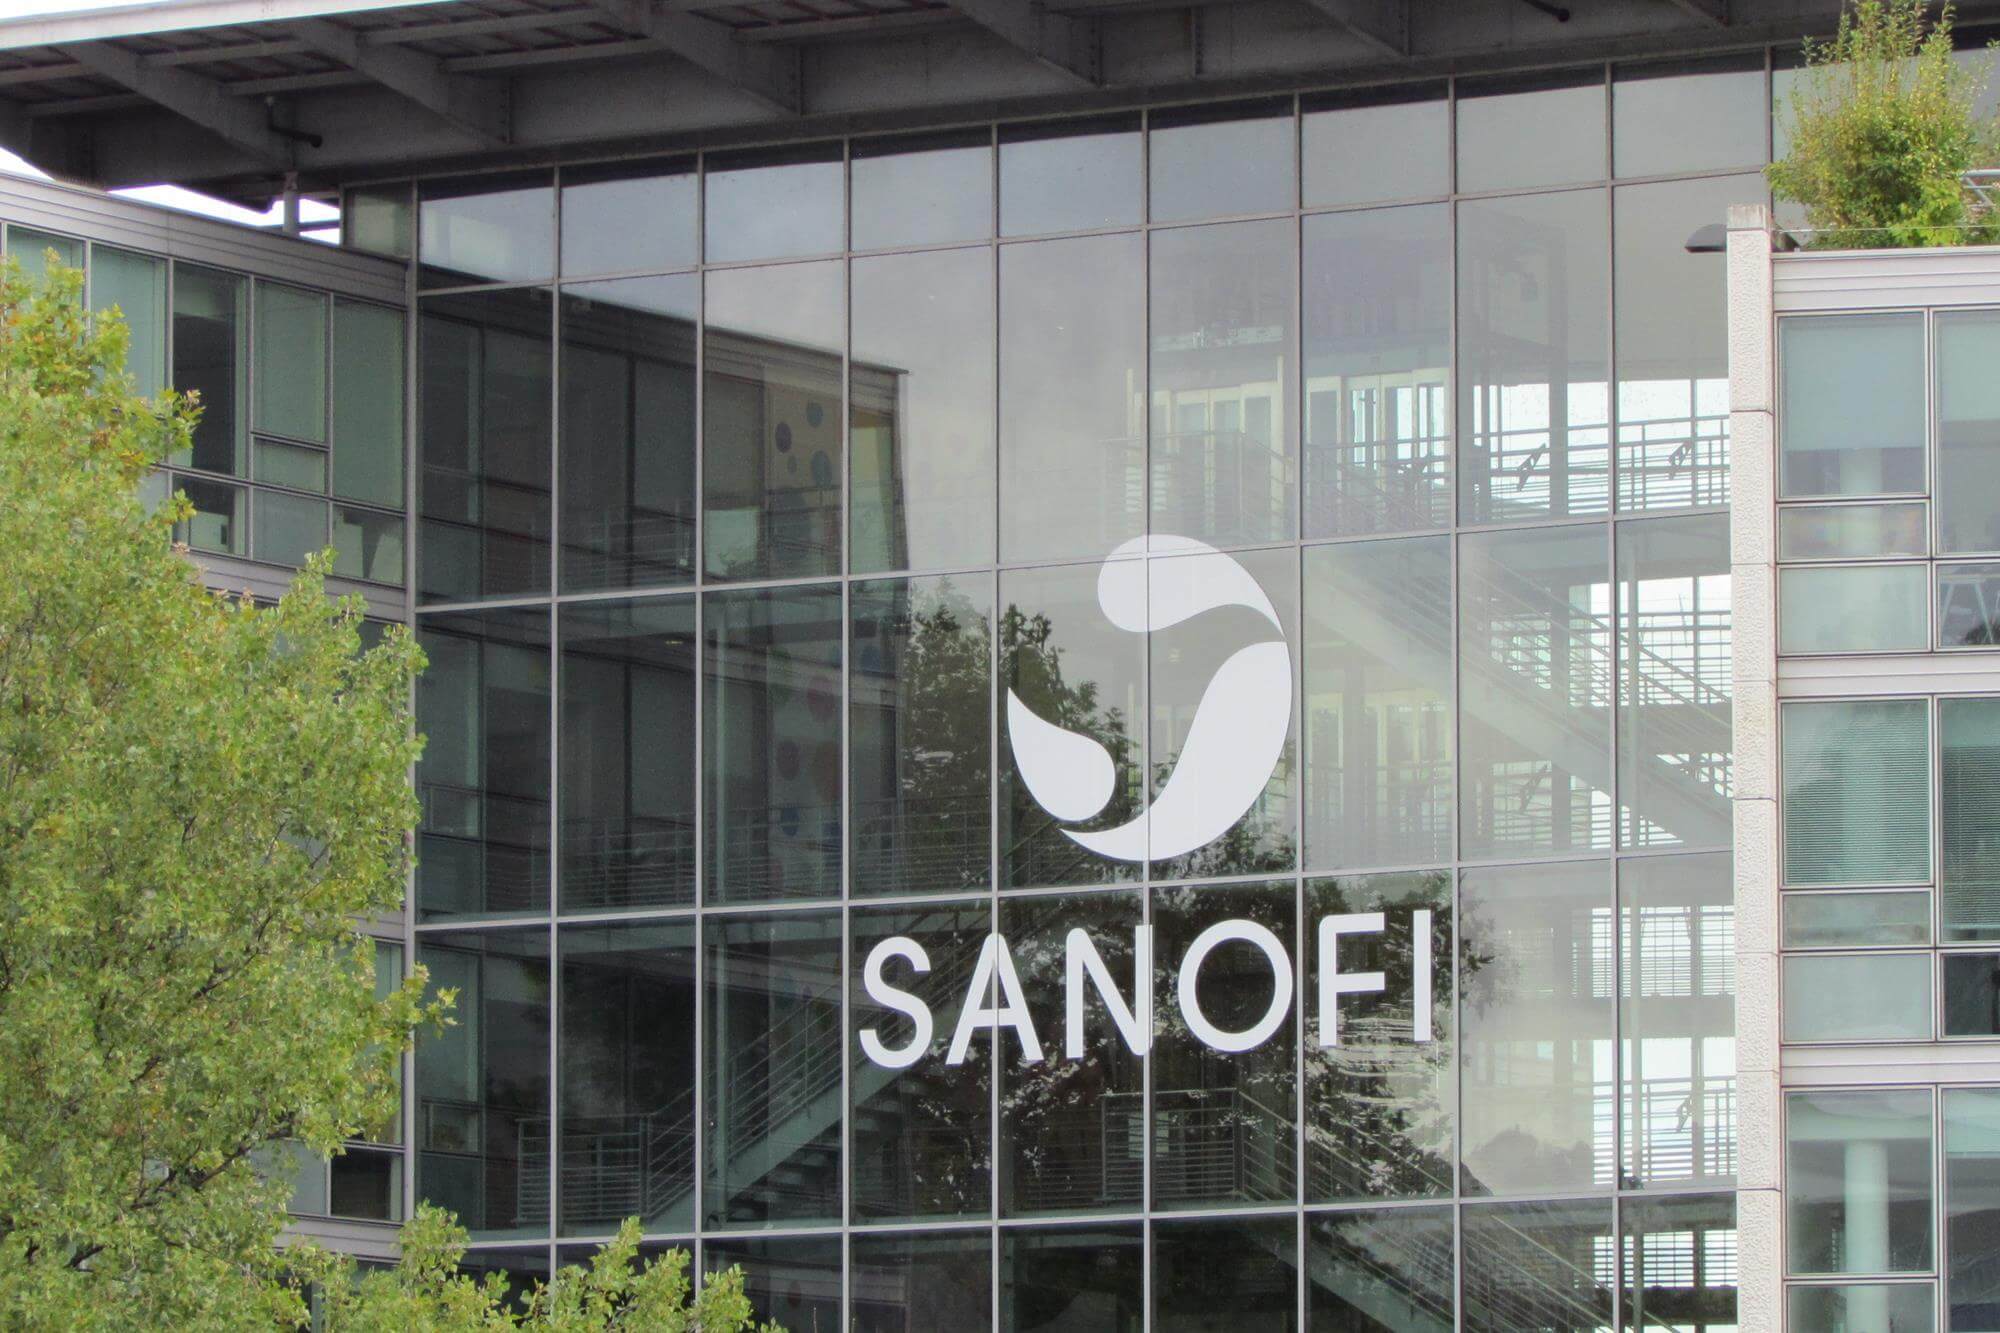 Sanofi and Denali Therapeutics Collaborates to Develop & Commercialize Clinical Candidates for Neurology and Inflammatory Disorders